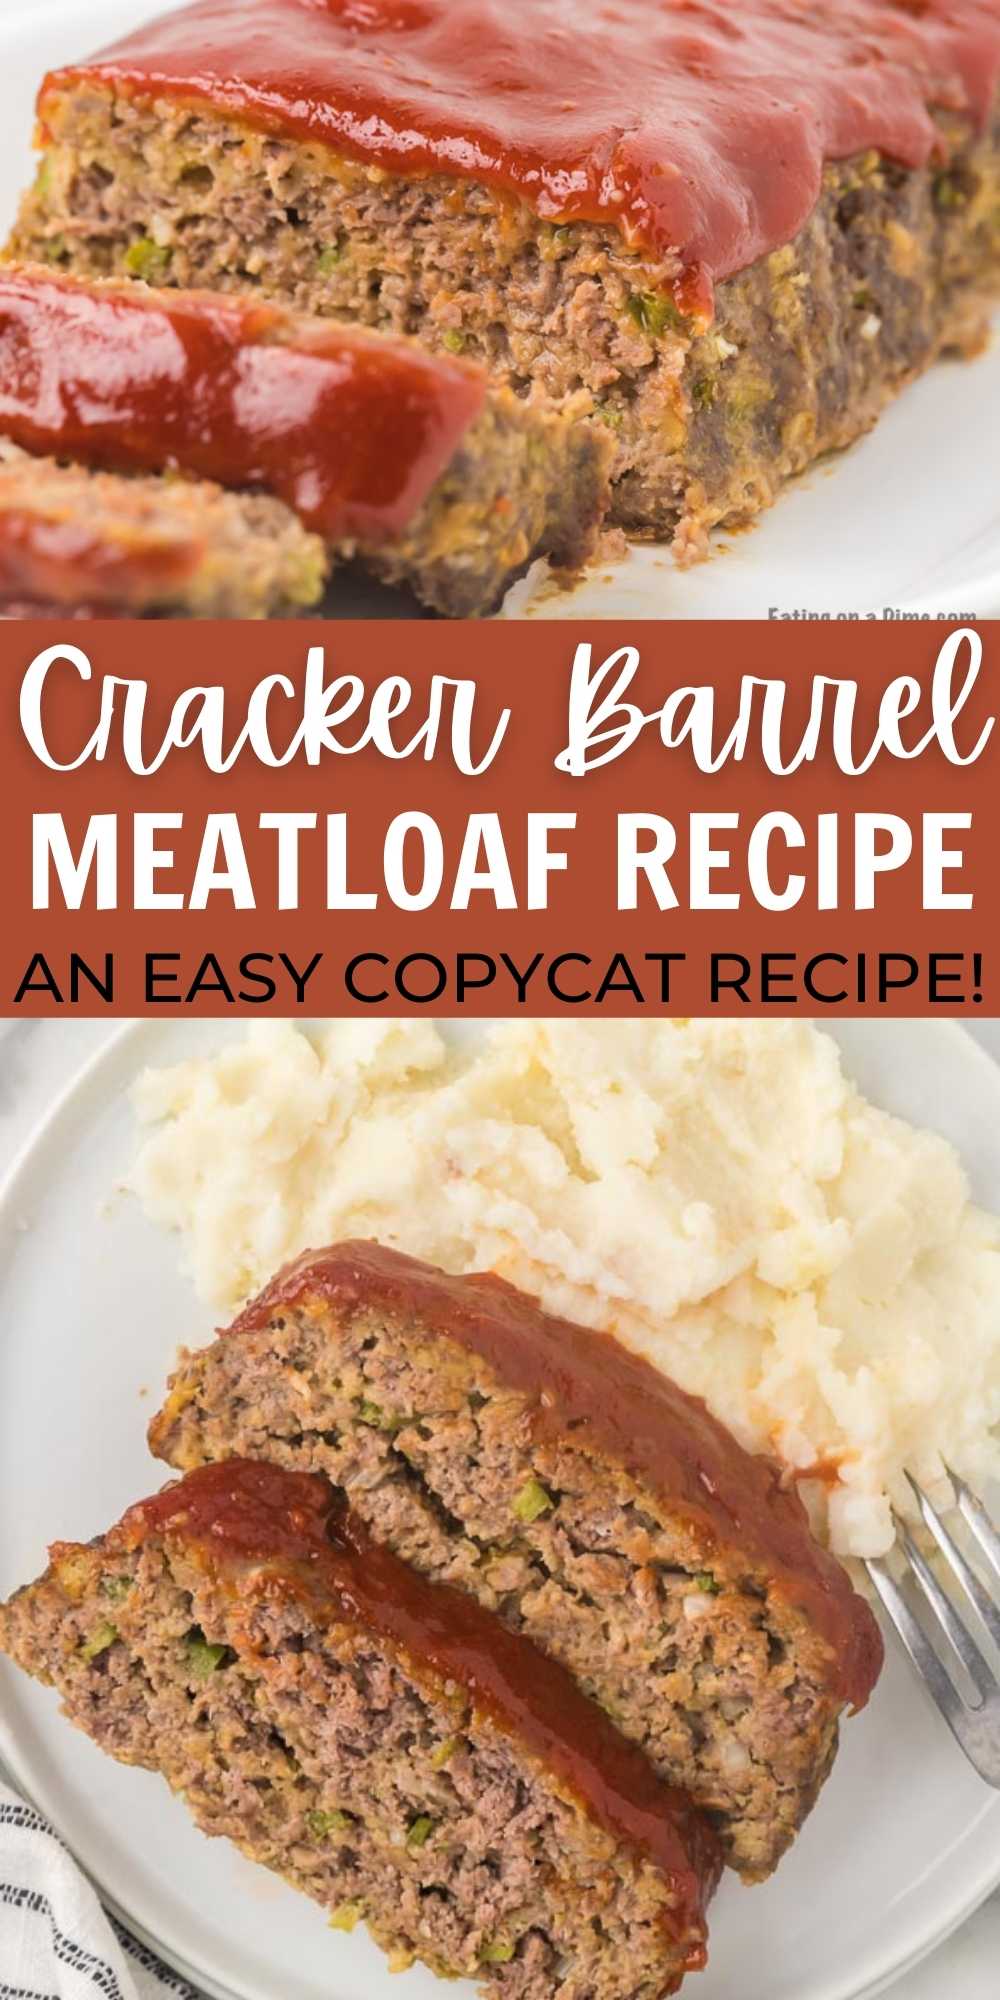 This copycat Cracker Barrel Meatloaf Recipe is easy to make at home and tastes  even better than the one from the Country Store! This is the best copycat recipe that is simple to make with beef and Ritz crackers.  #eatingonadime #copycatrecipes #beefrecipes #meatloaf 
